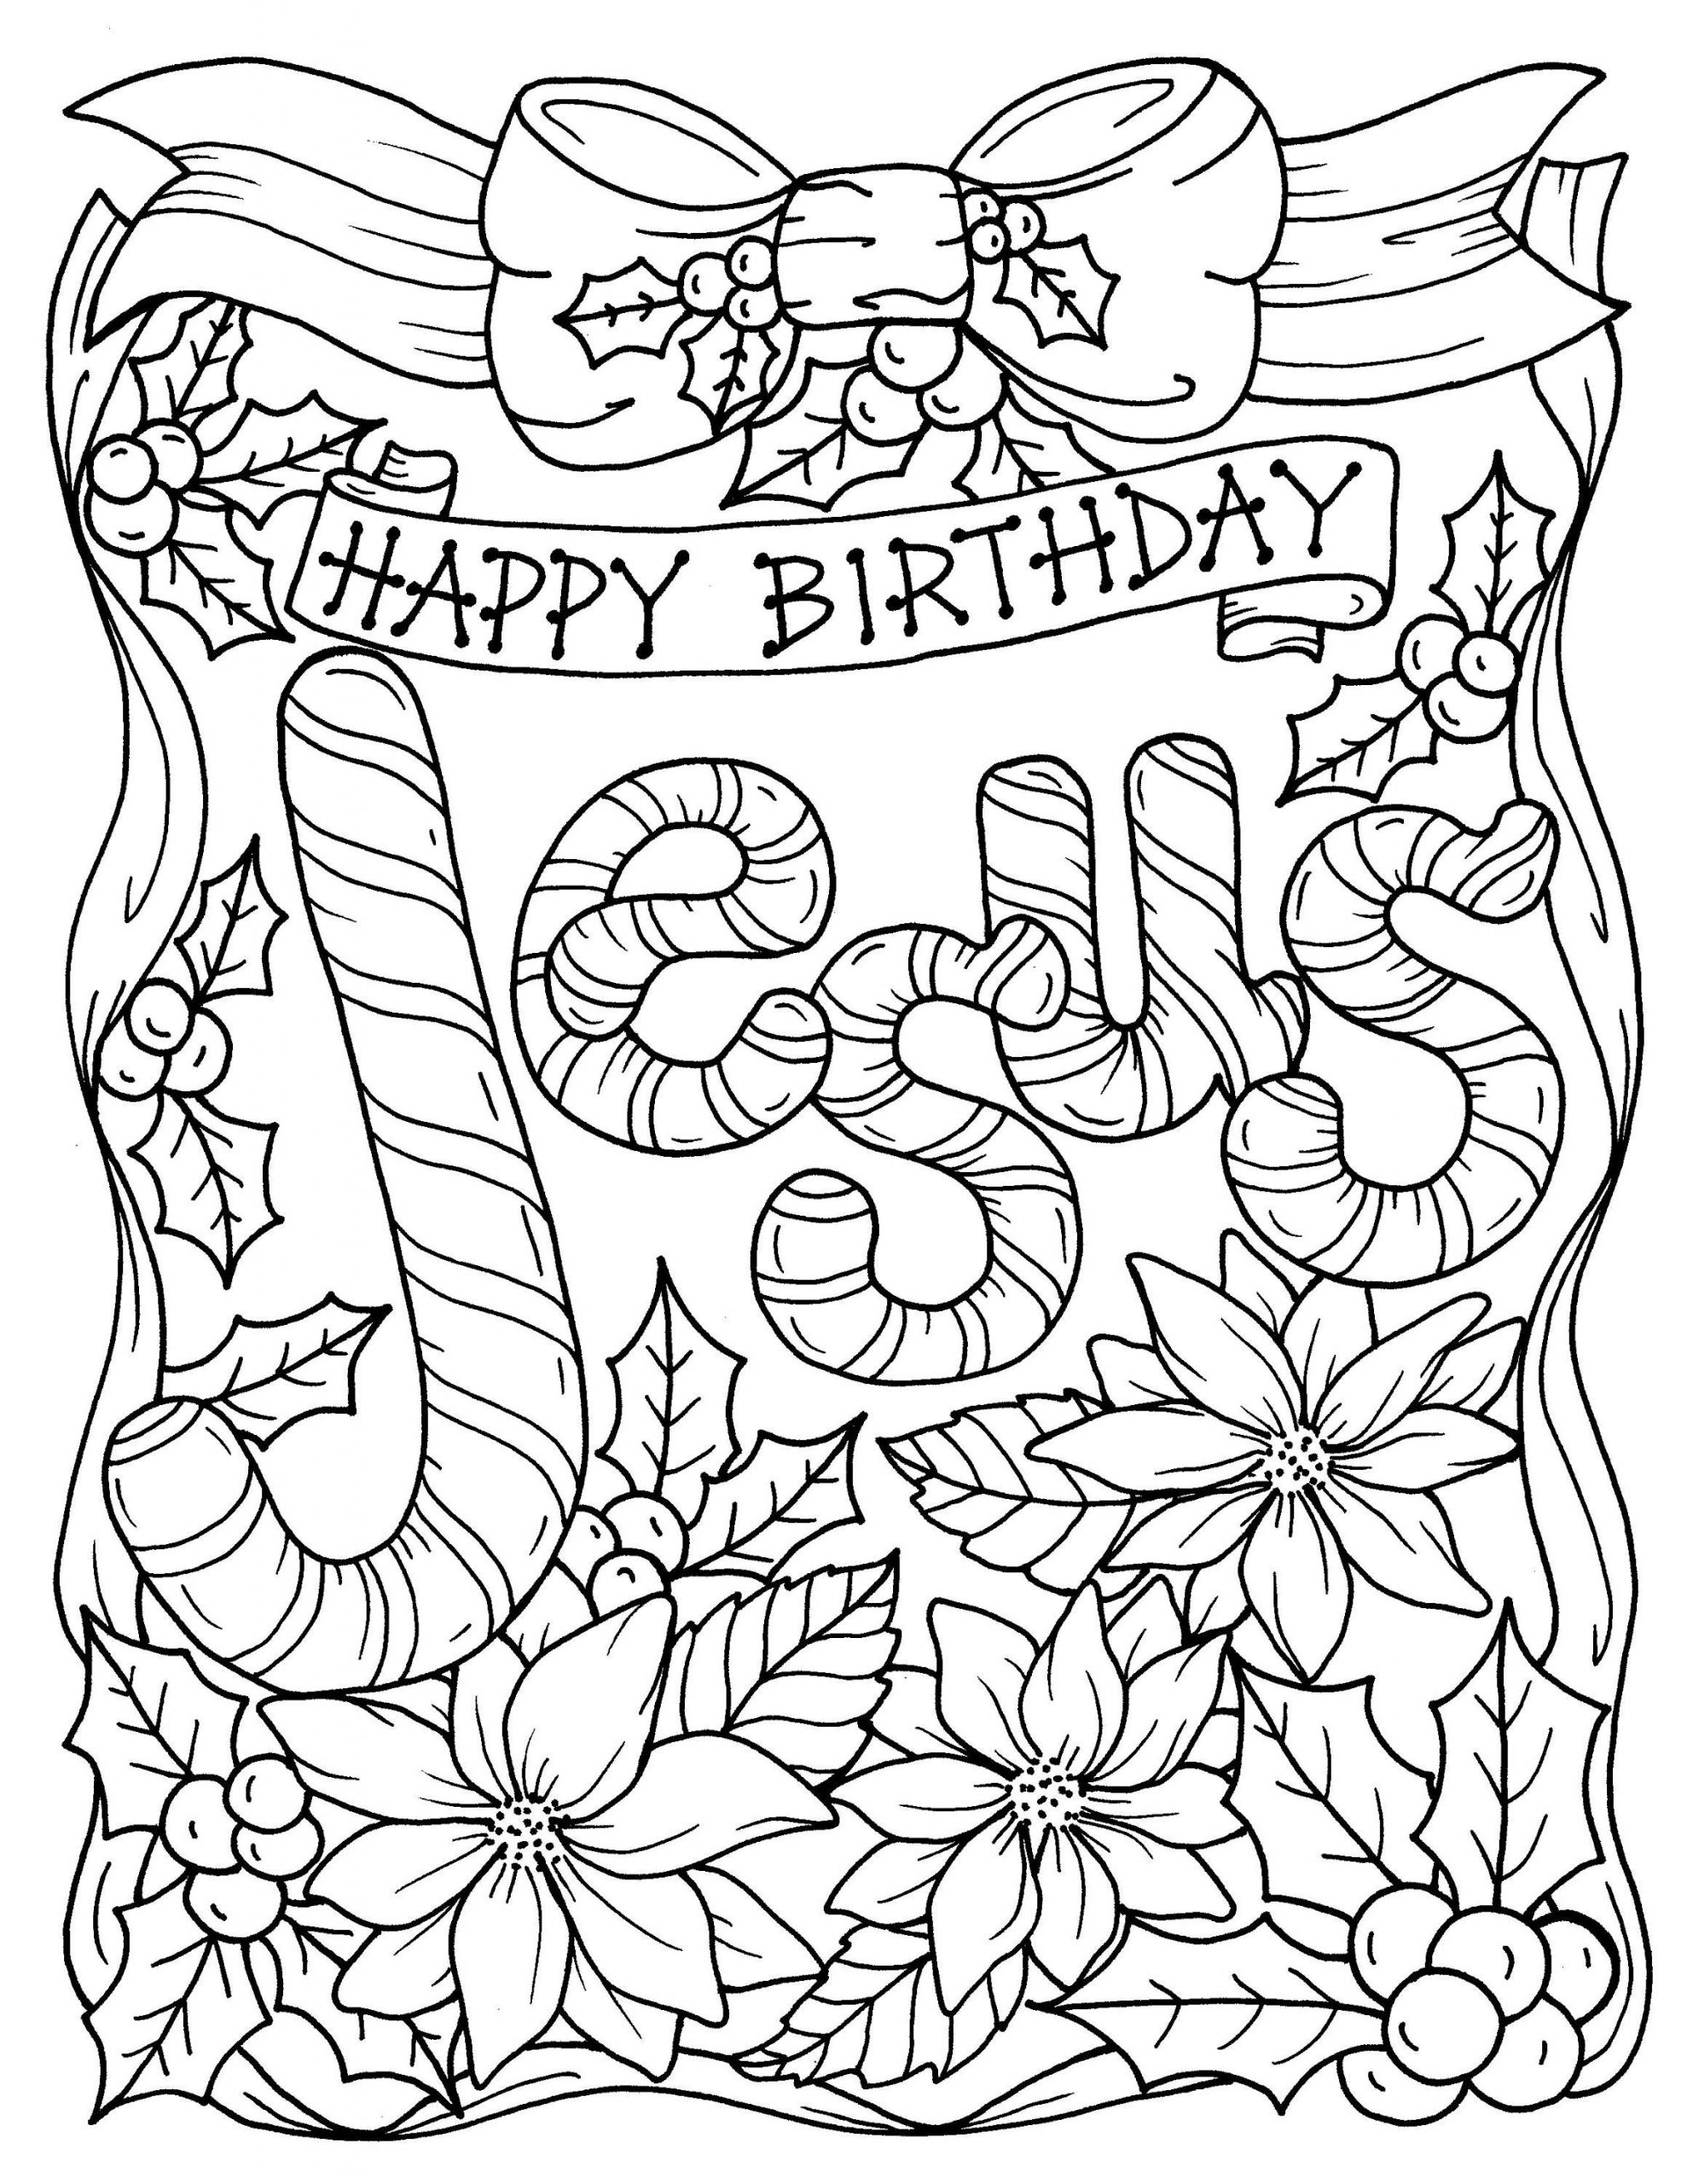 Christmas Coloring Pages For Adults
 5 Pages Christmas Coloring Christian Religious scripture